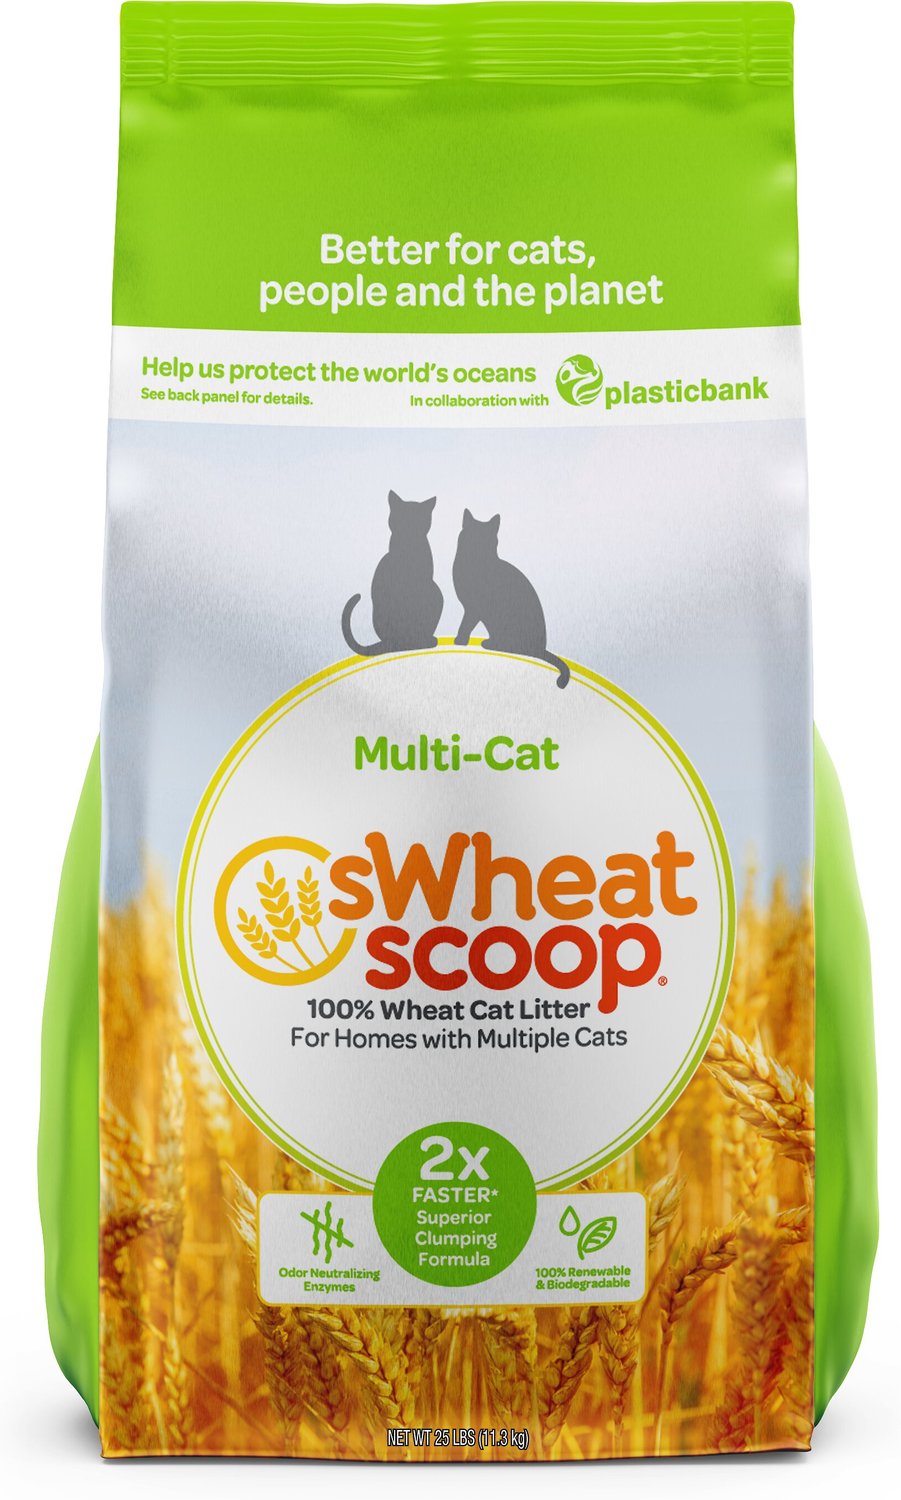 swheat-scoop-multi-cat-natural-wheat-cat-litter-25-lb-bag-chewy